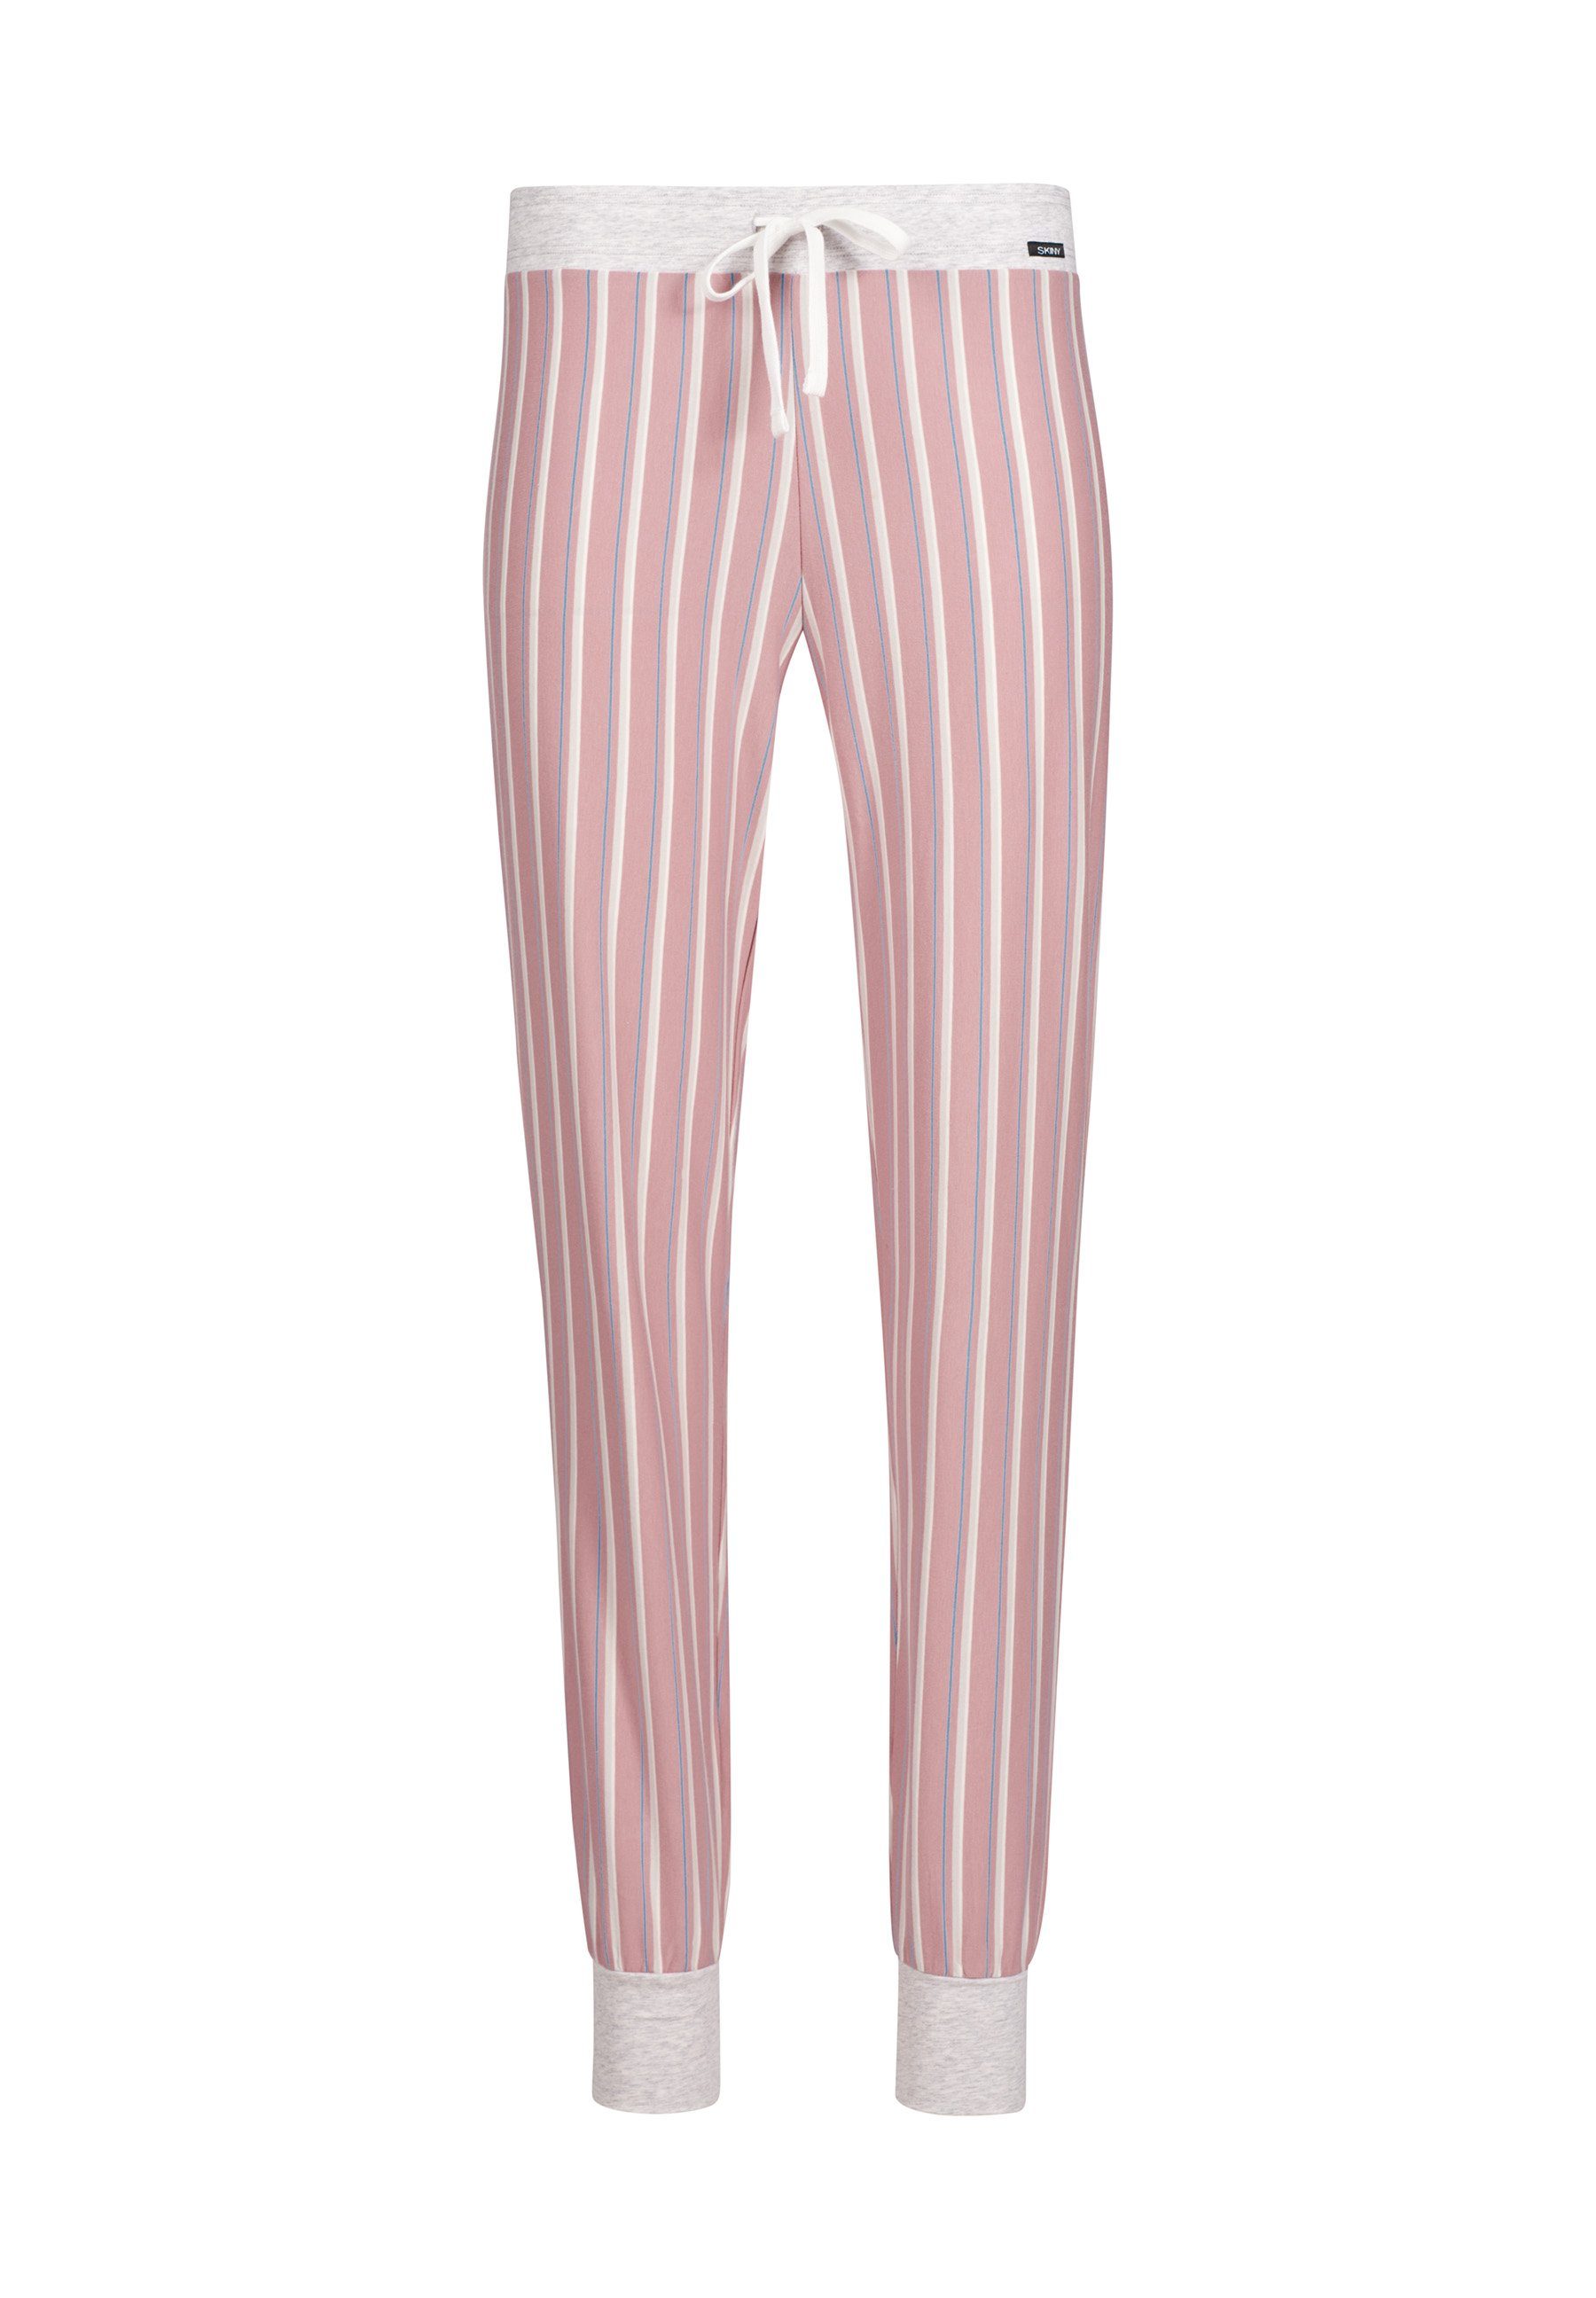 In Skiny & Match woodrose Mix Schlafhose (1-tlg) Night stripes